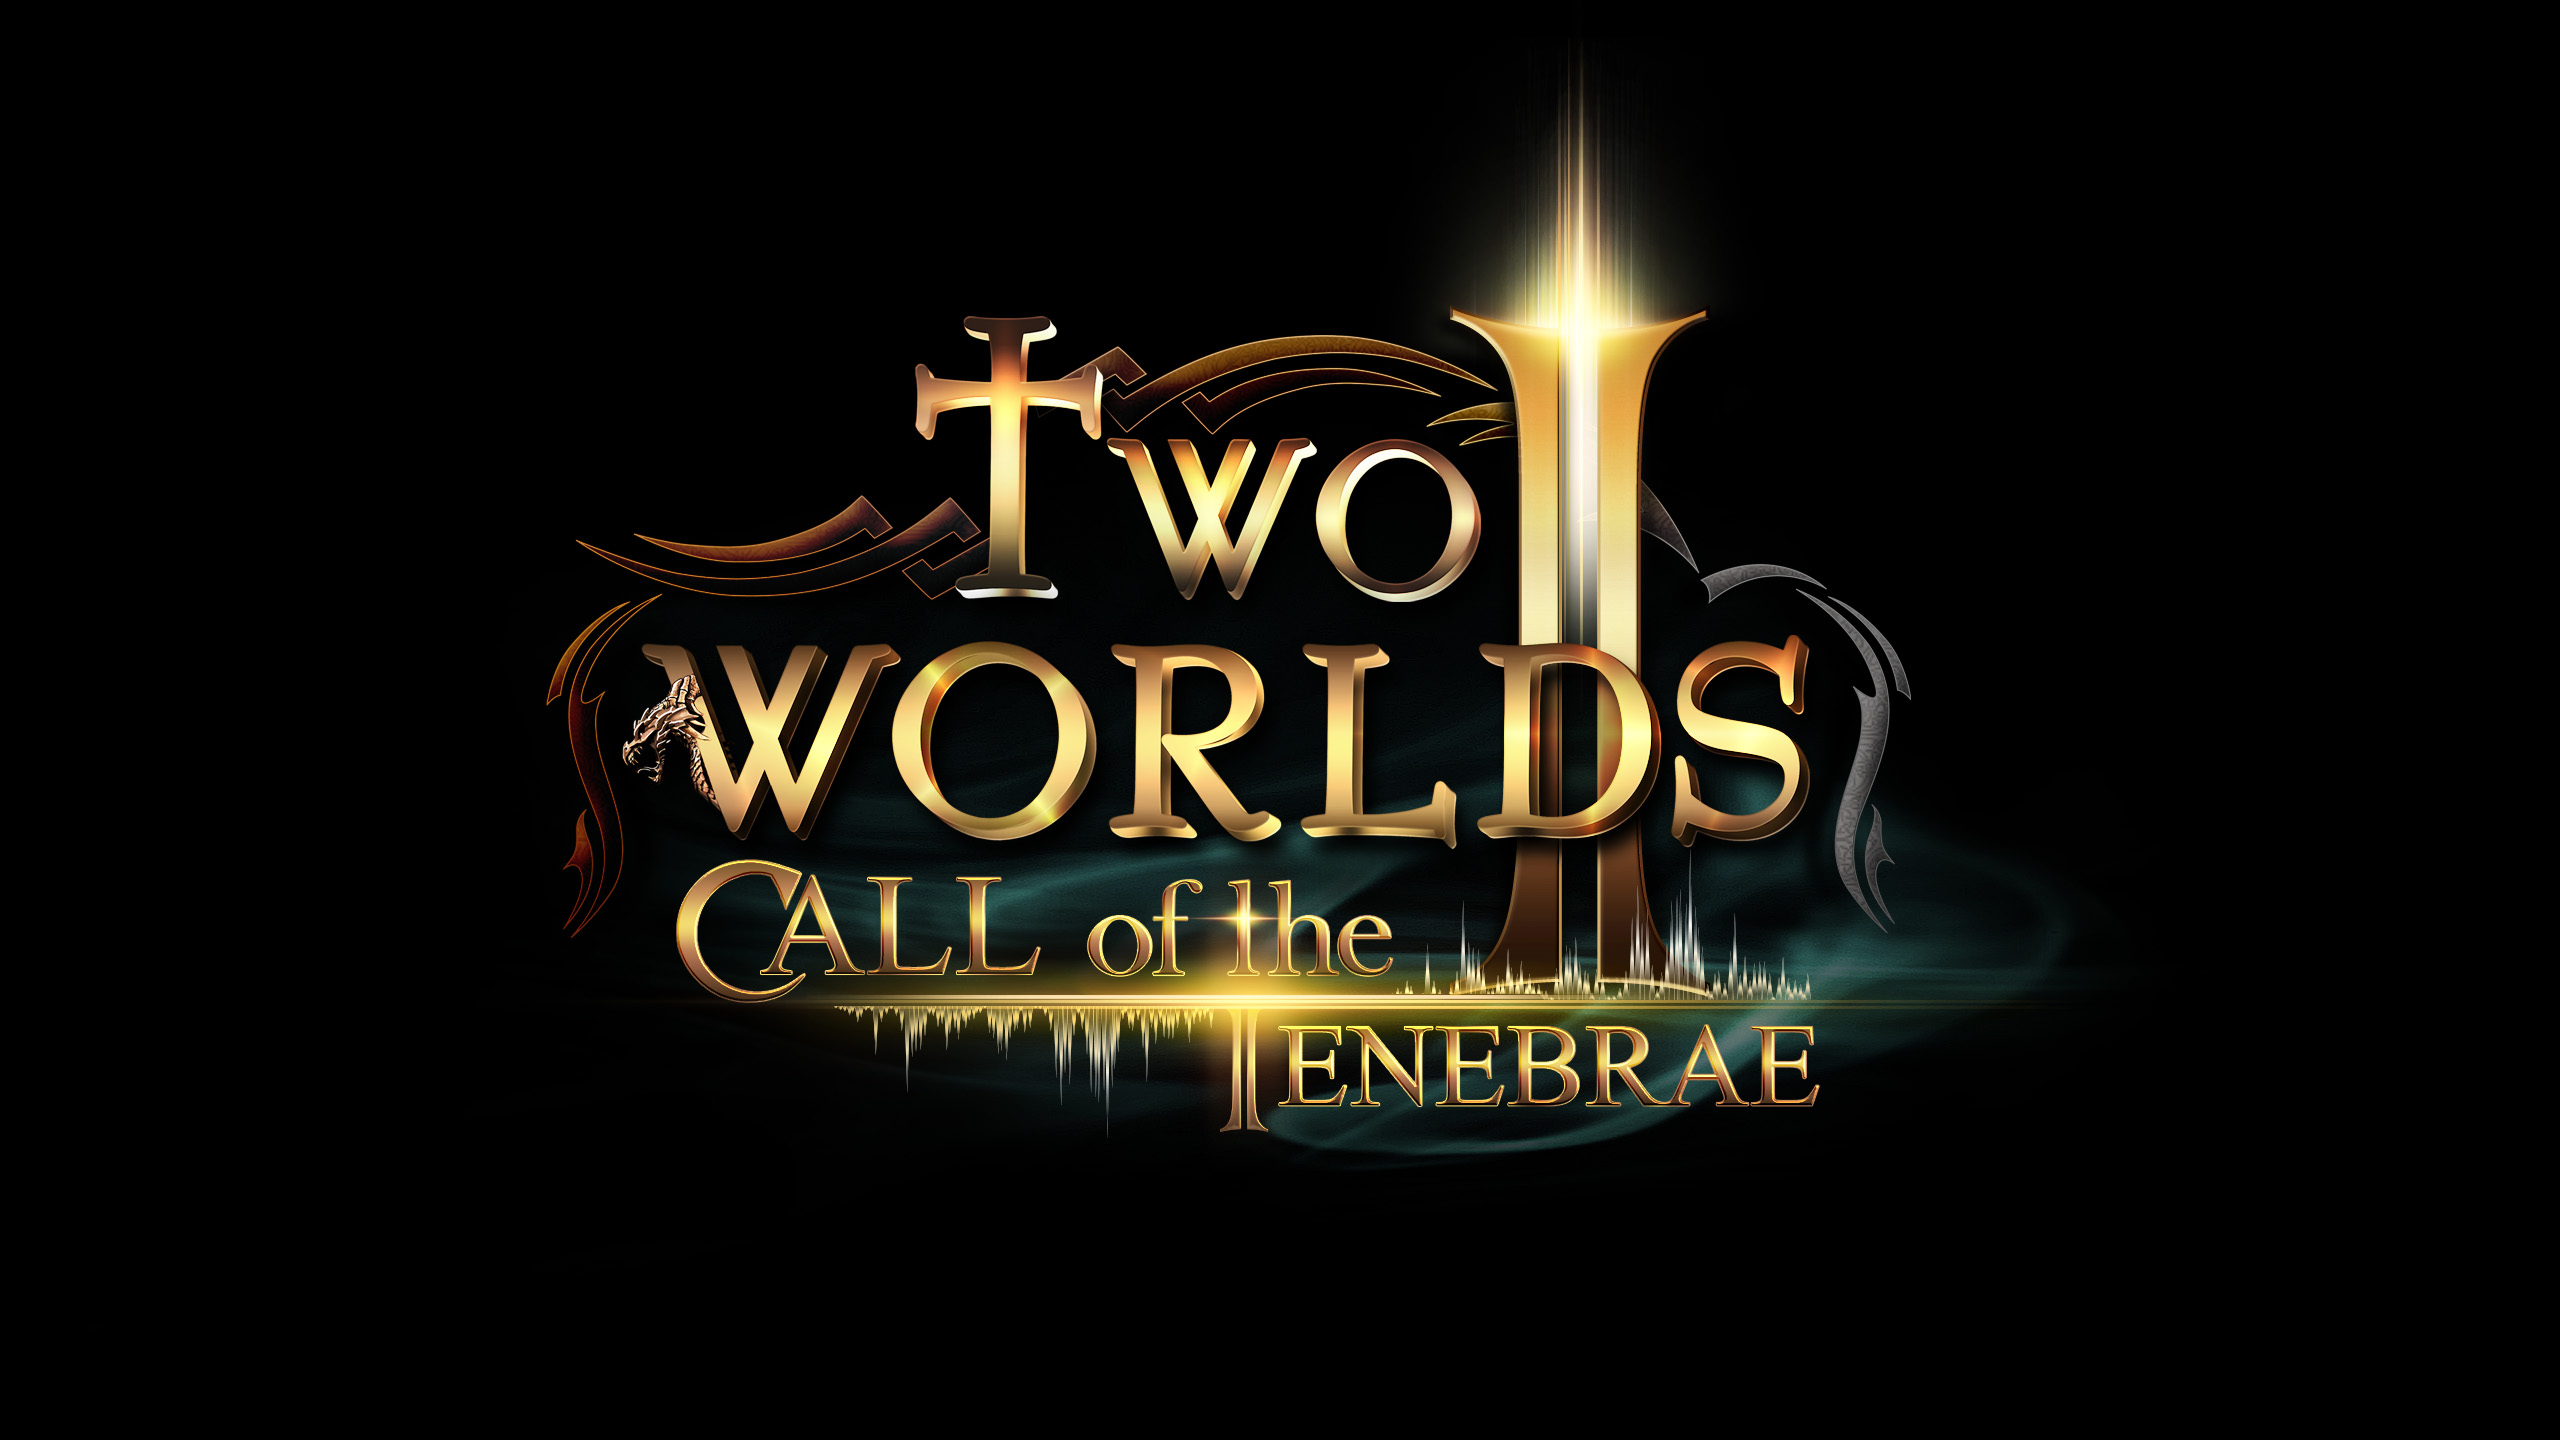 This is the world calling. Two Worlds II. Two Worlds 3. Two Worlds Постер. Two Worlds II - Call of the Tenebrae.